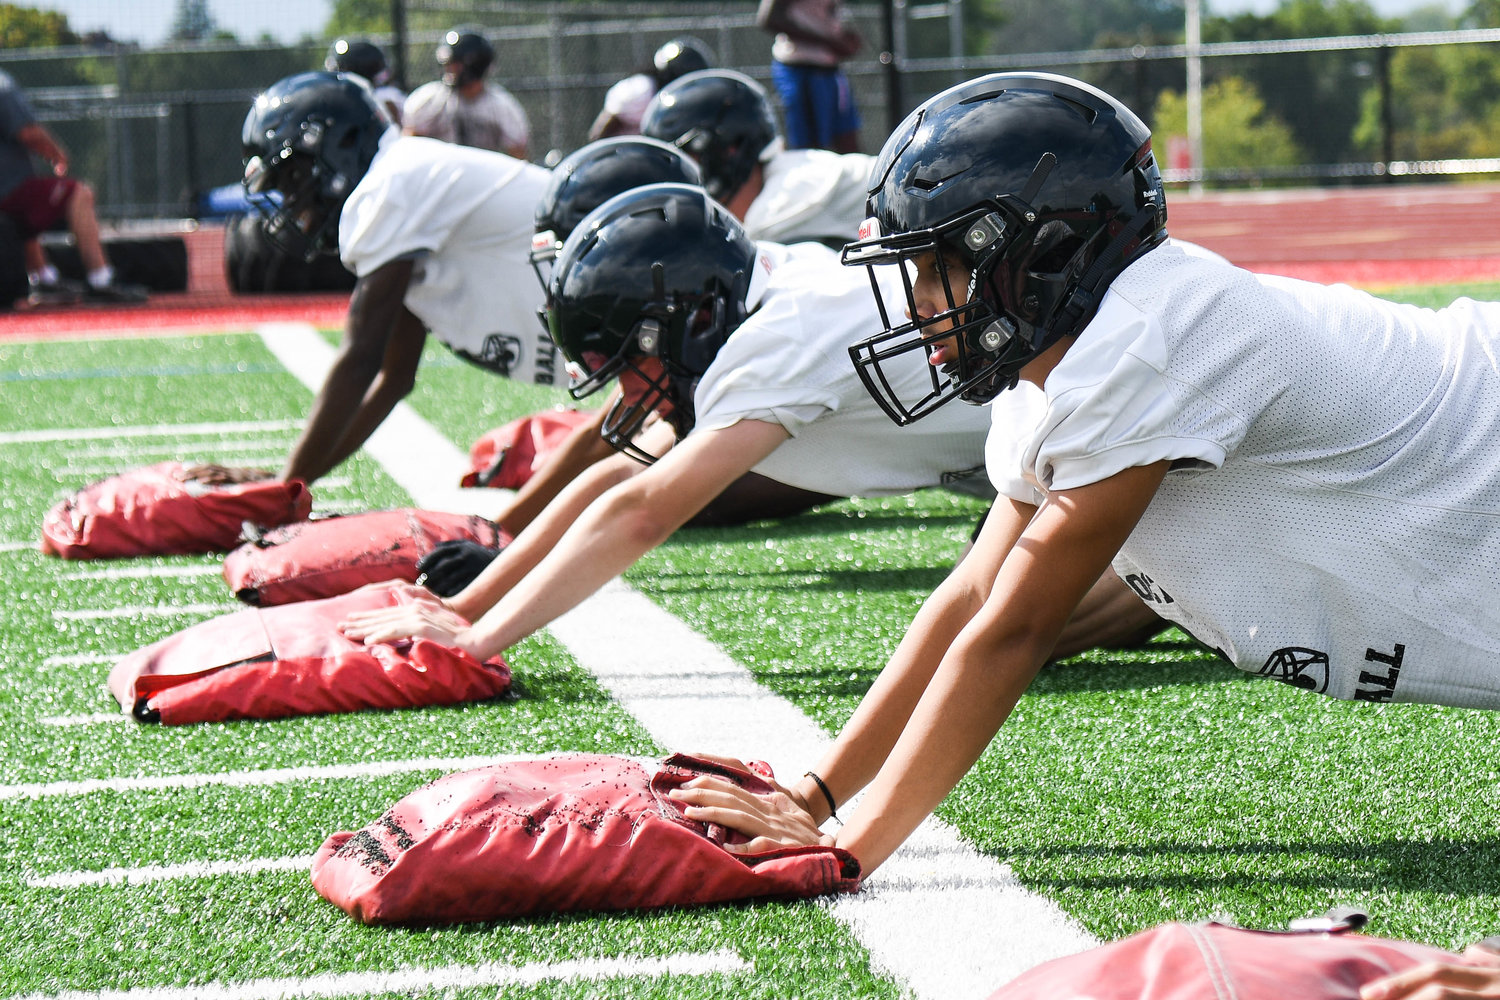 Thomas R. Proctor football players prepare to push sandbags across the turf during conditioning drills at practice on Monday at D'Alessandro Stadium in Utica. The team is coming off a 4-4 season last fall after not participating during the altered spring 2021 season due to COVID-19-related considerations.